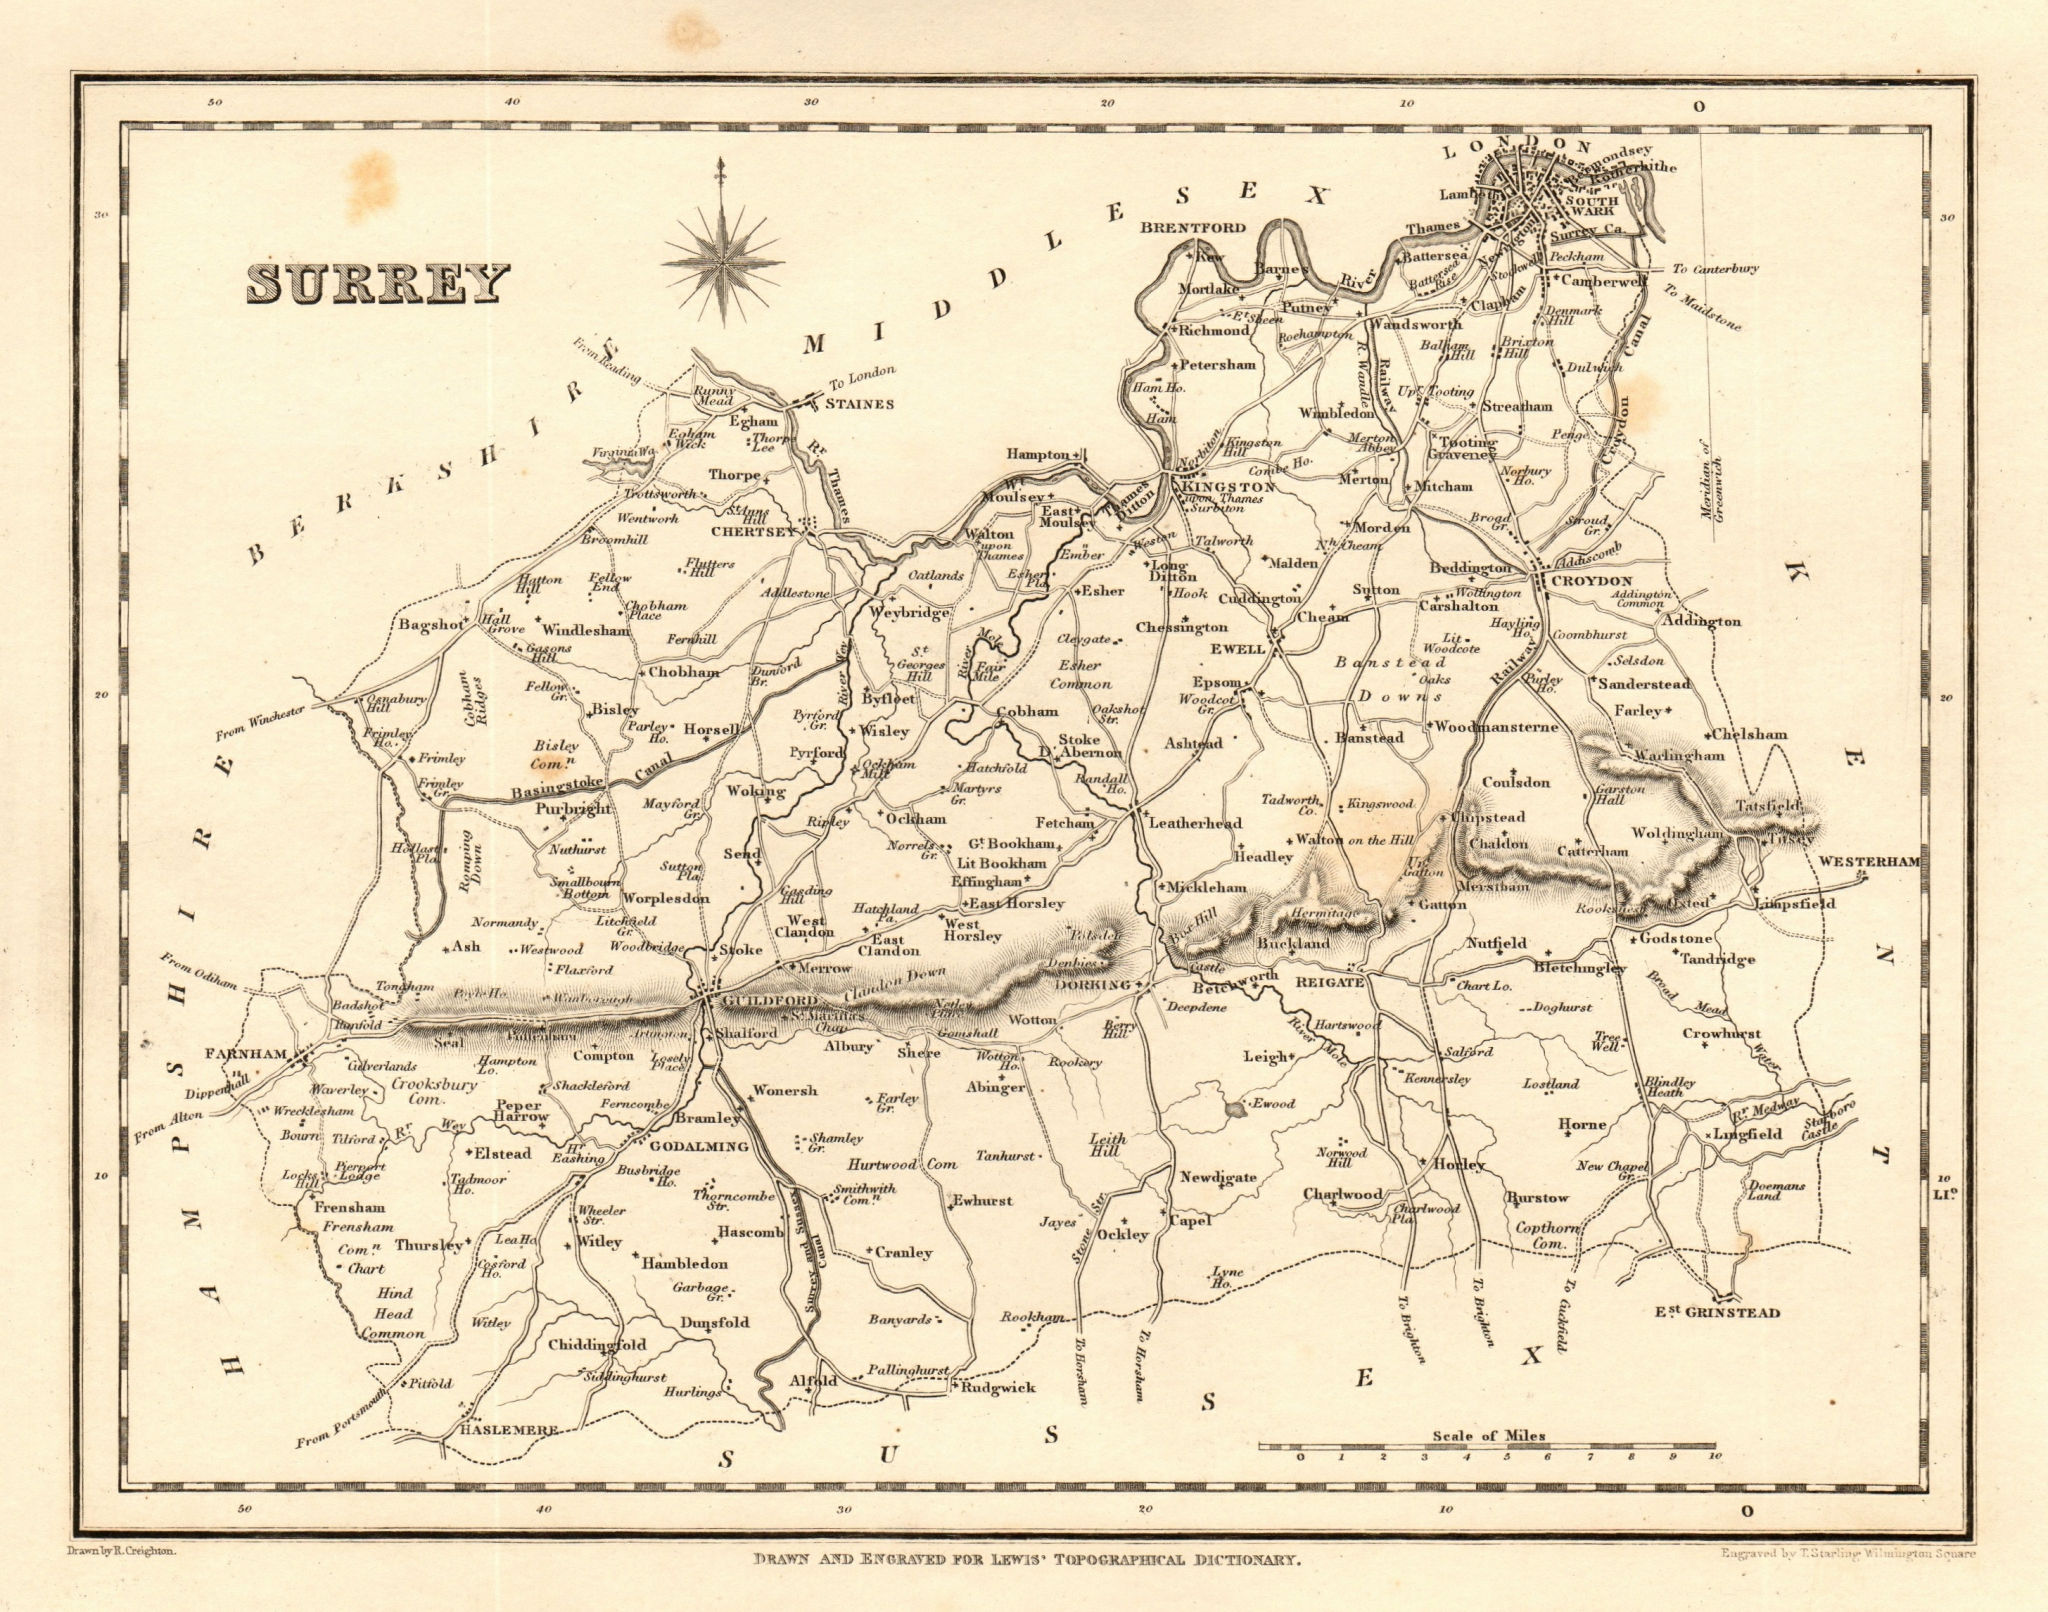 Associate Product Antique county map of SURREY by Starling & Creighton for Lewis c1840 old